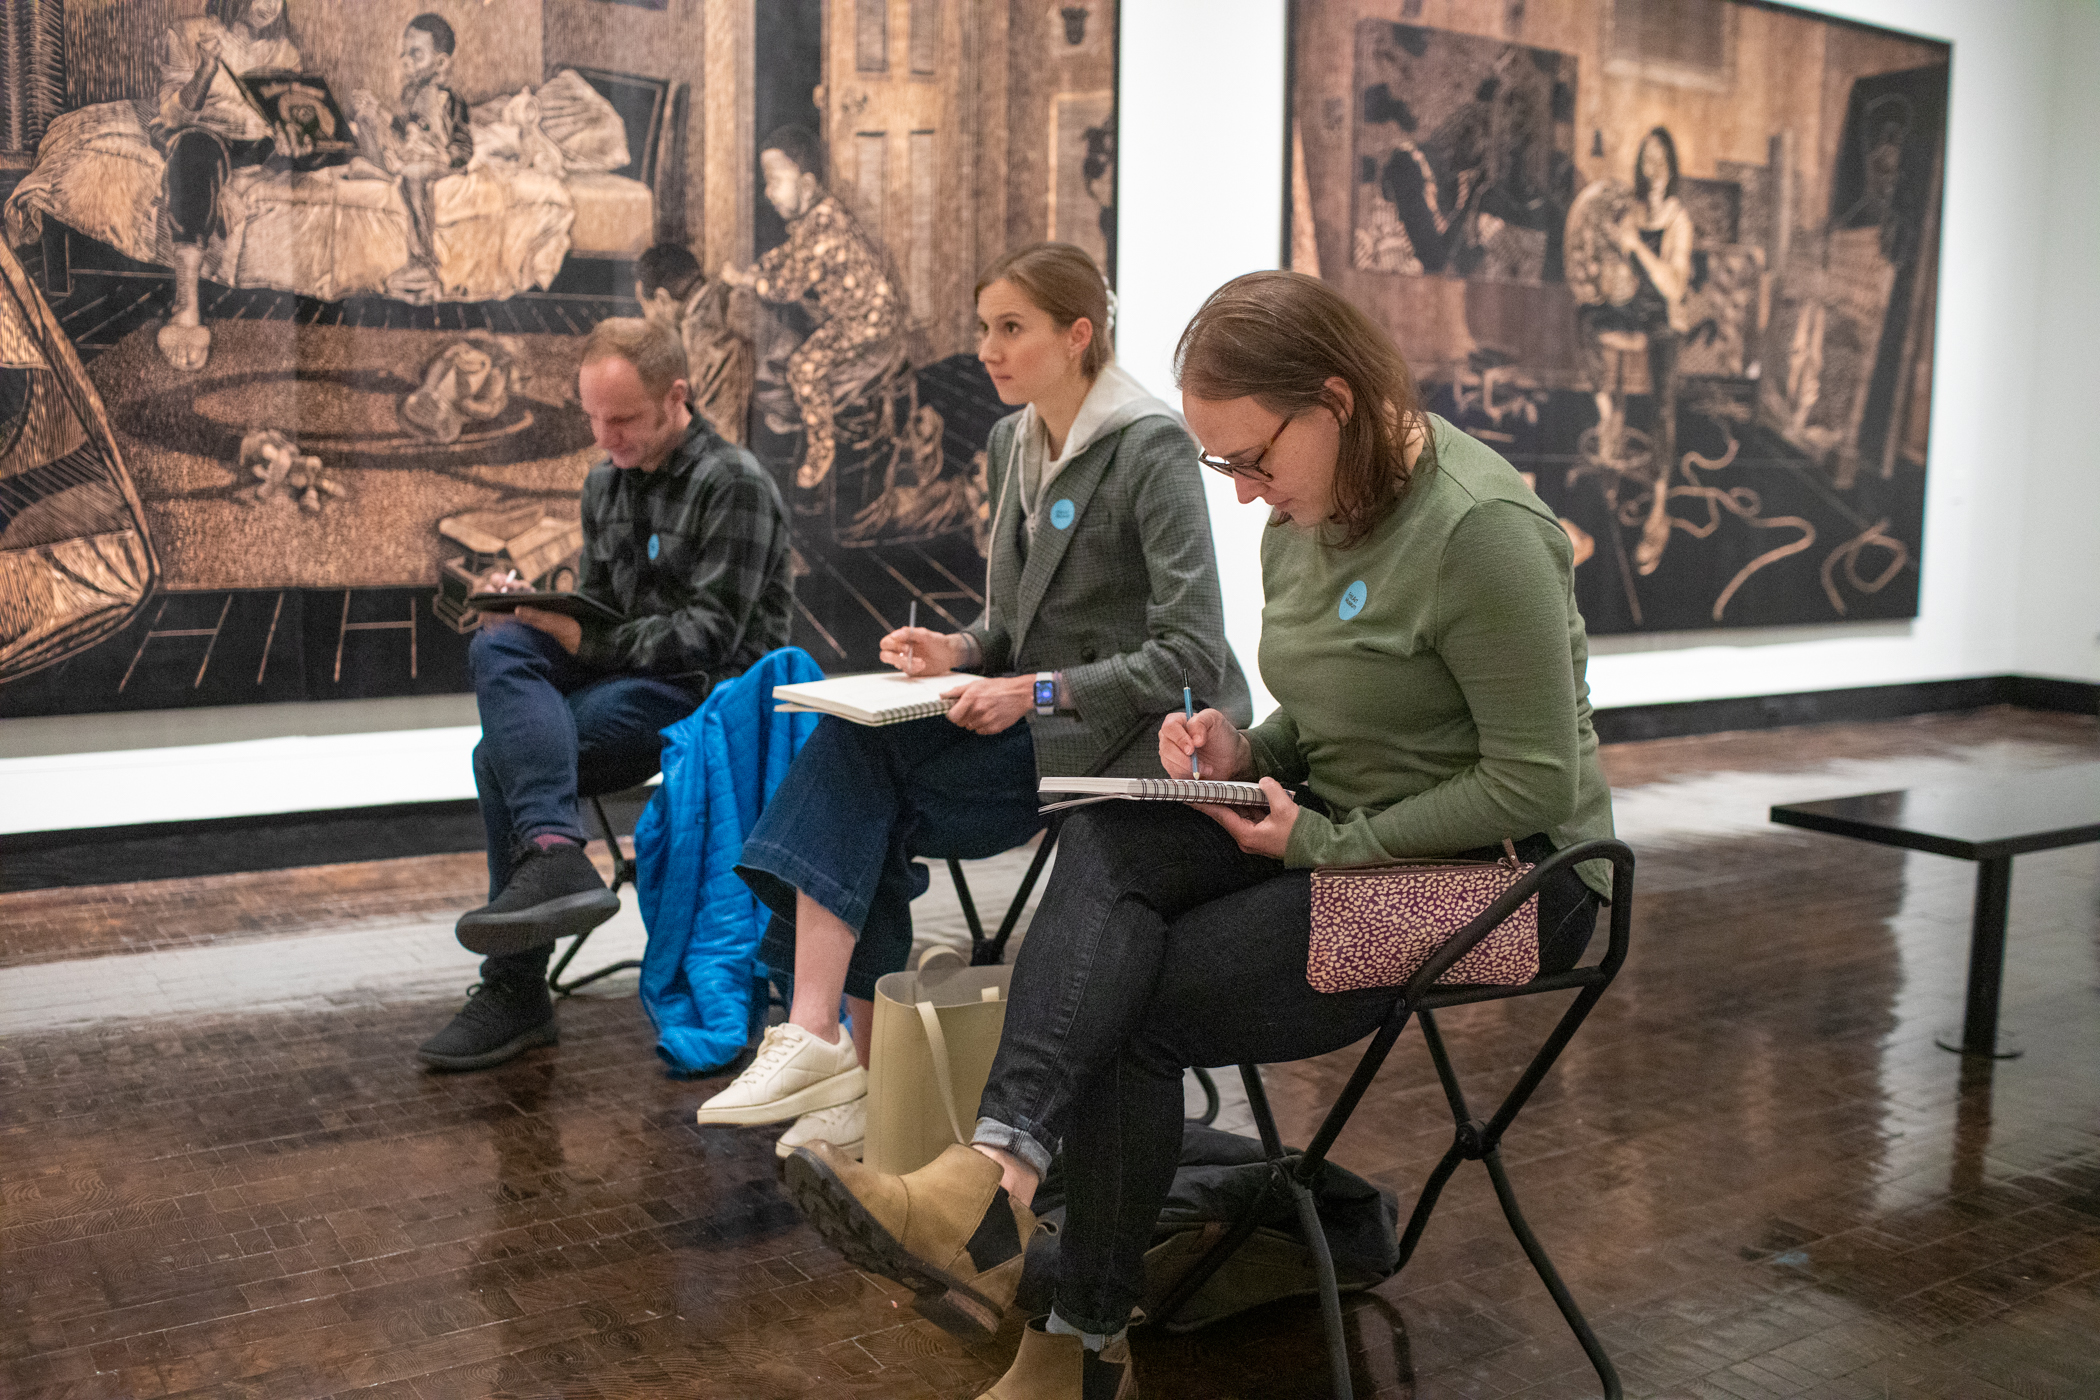 Three people sitting on stools in the galleries drawing on lap easels